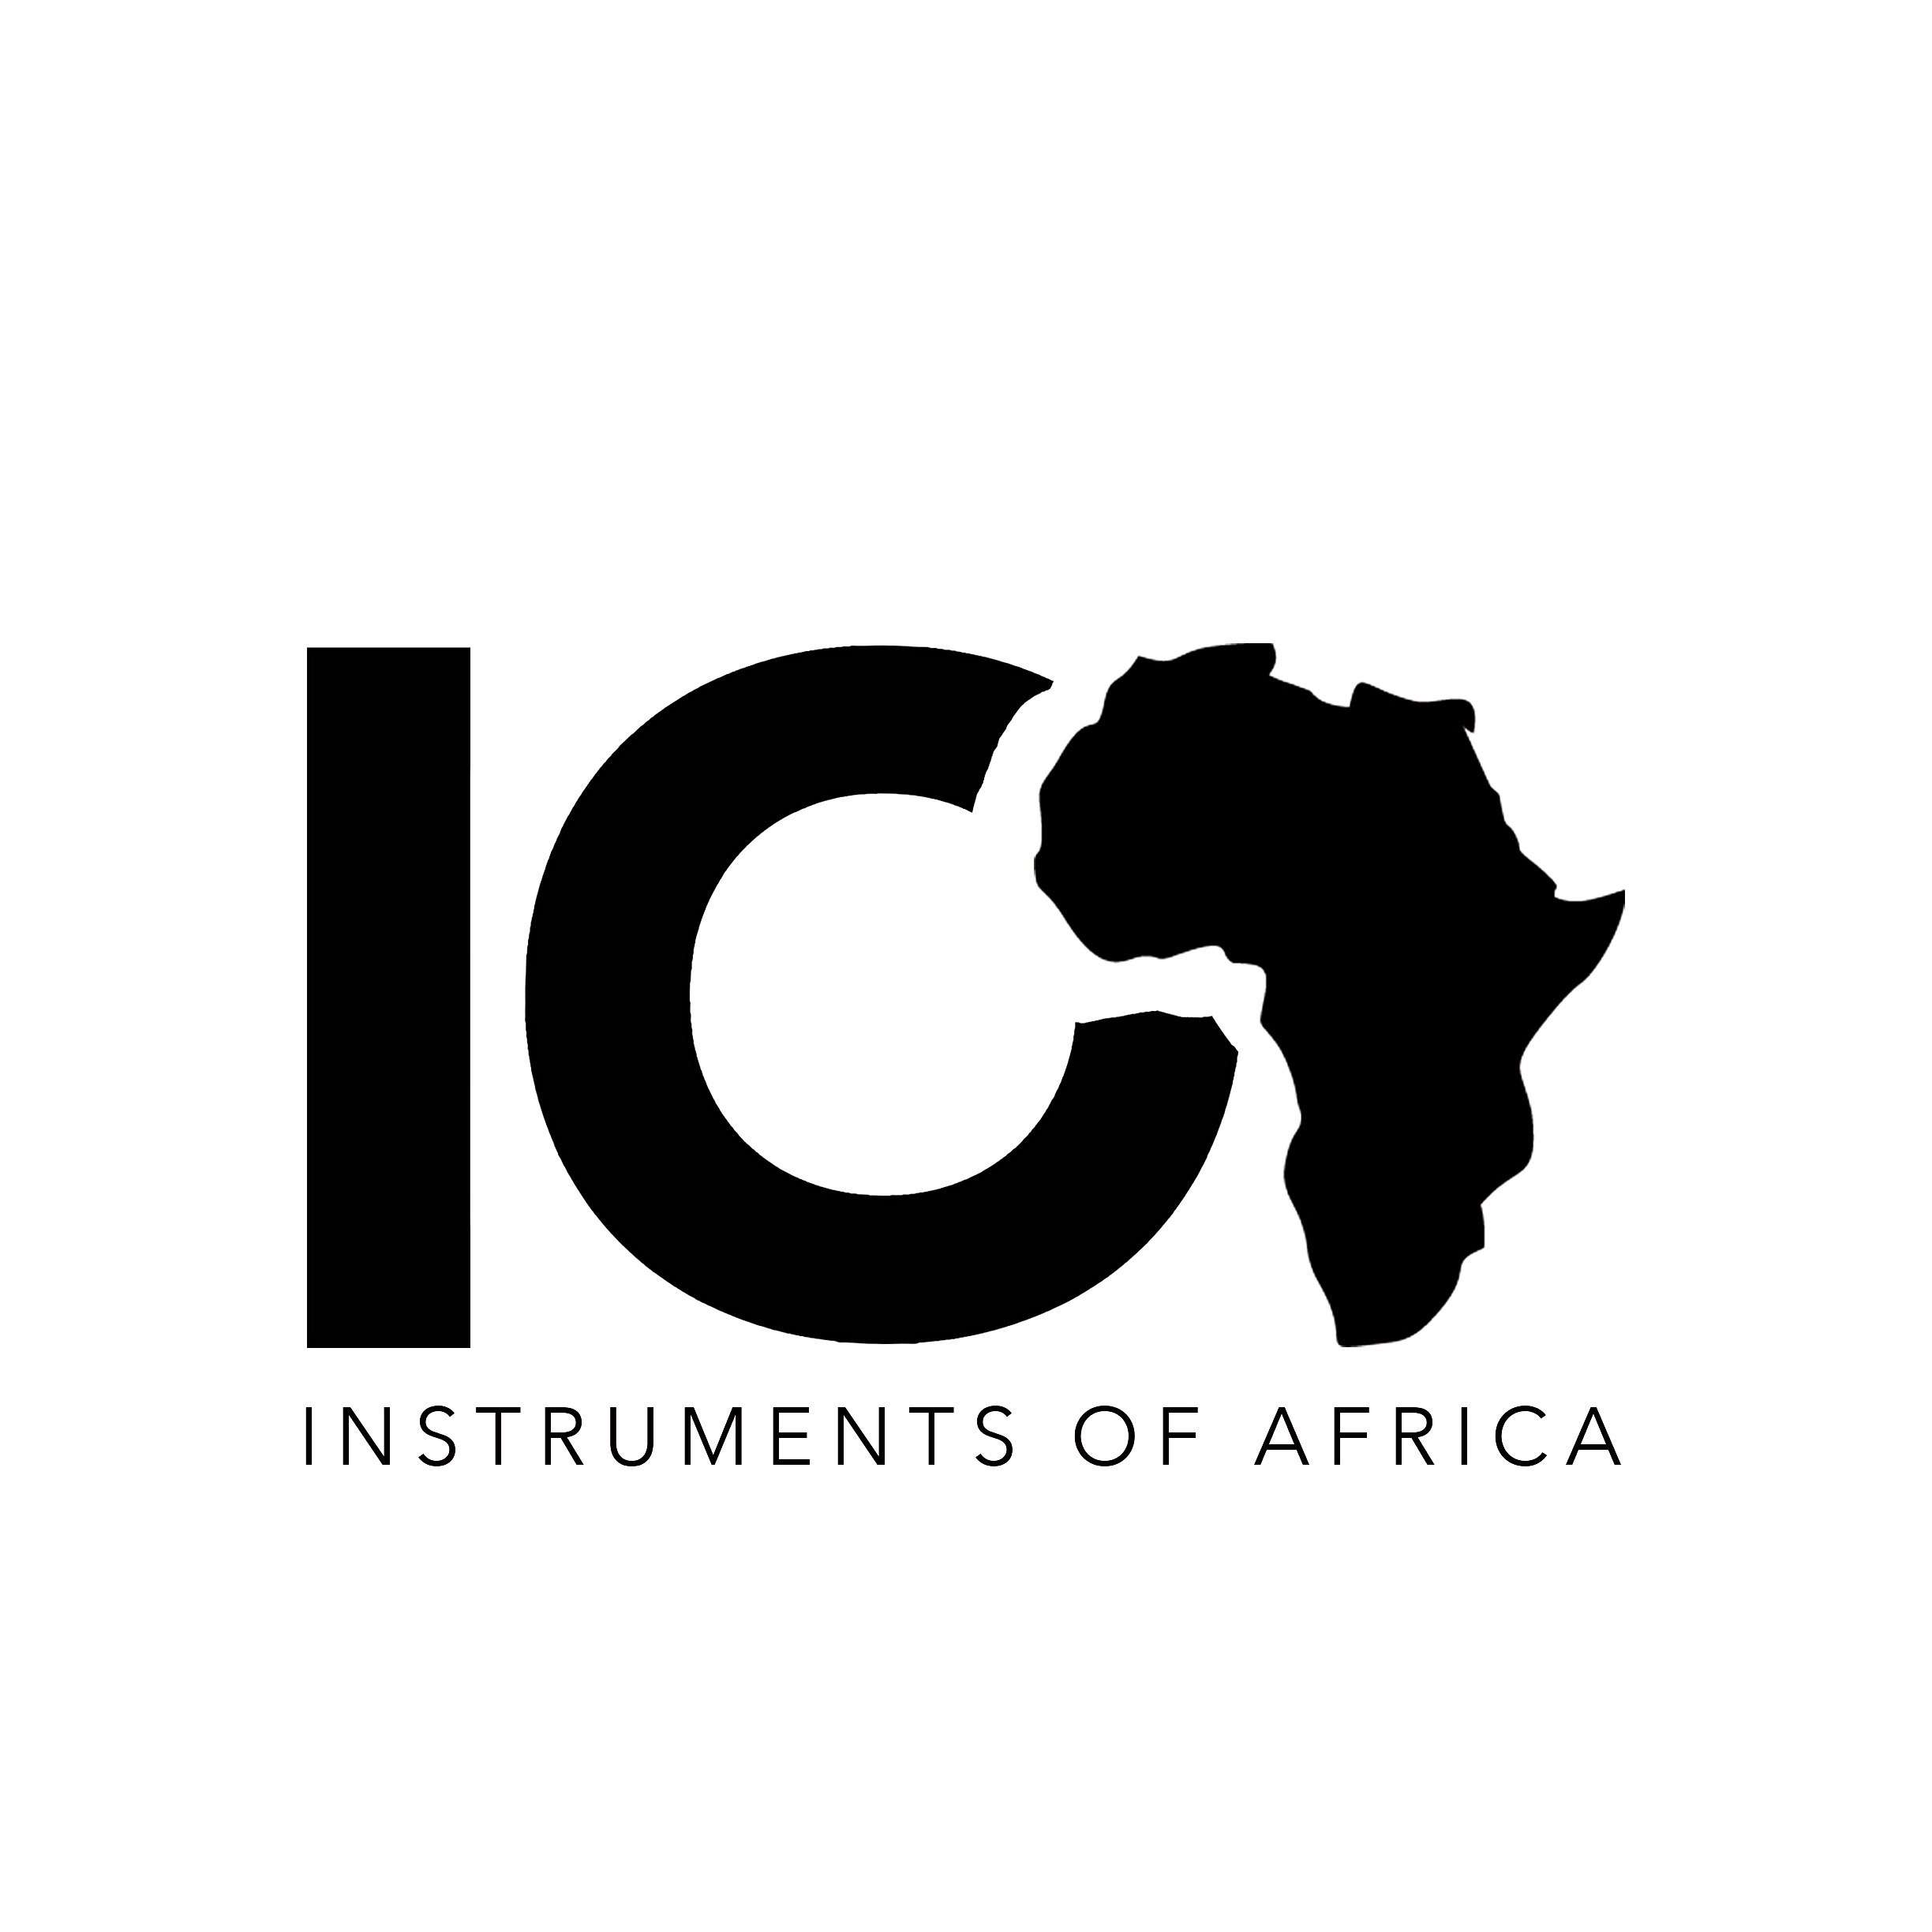 All about Instruments of Africa